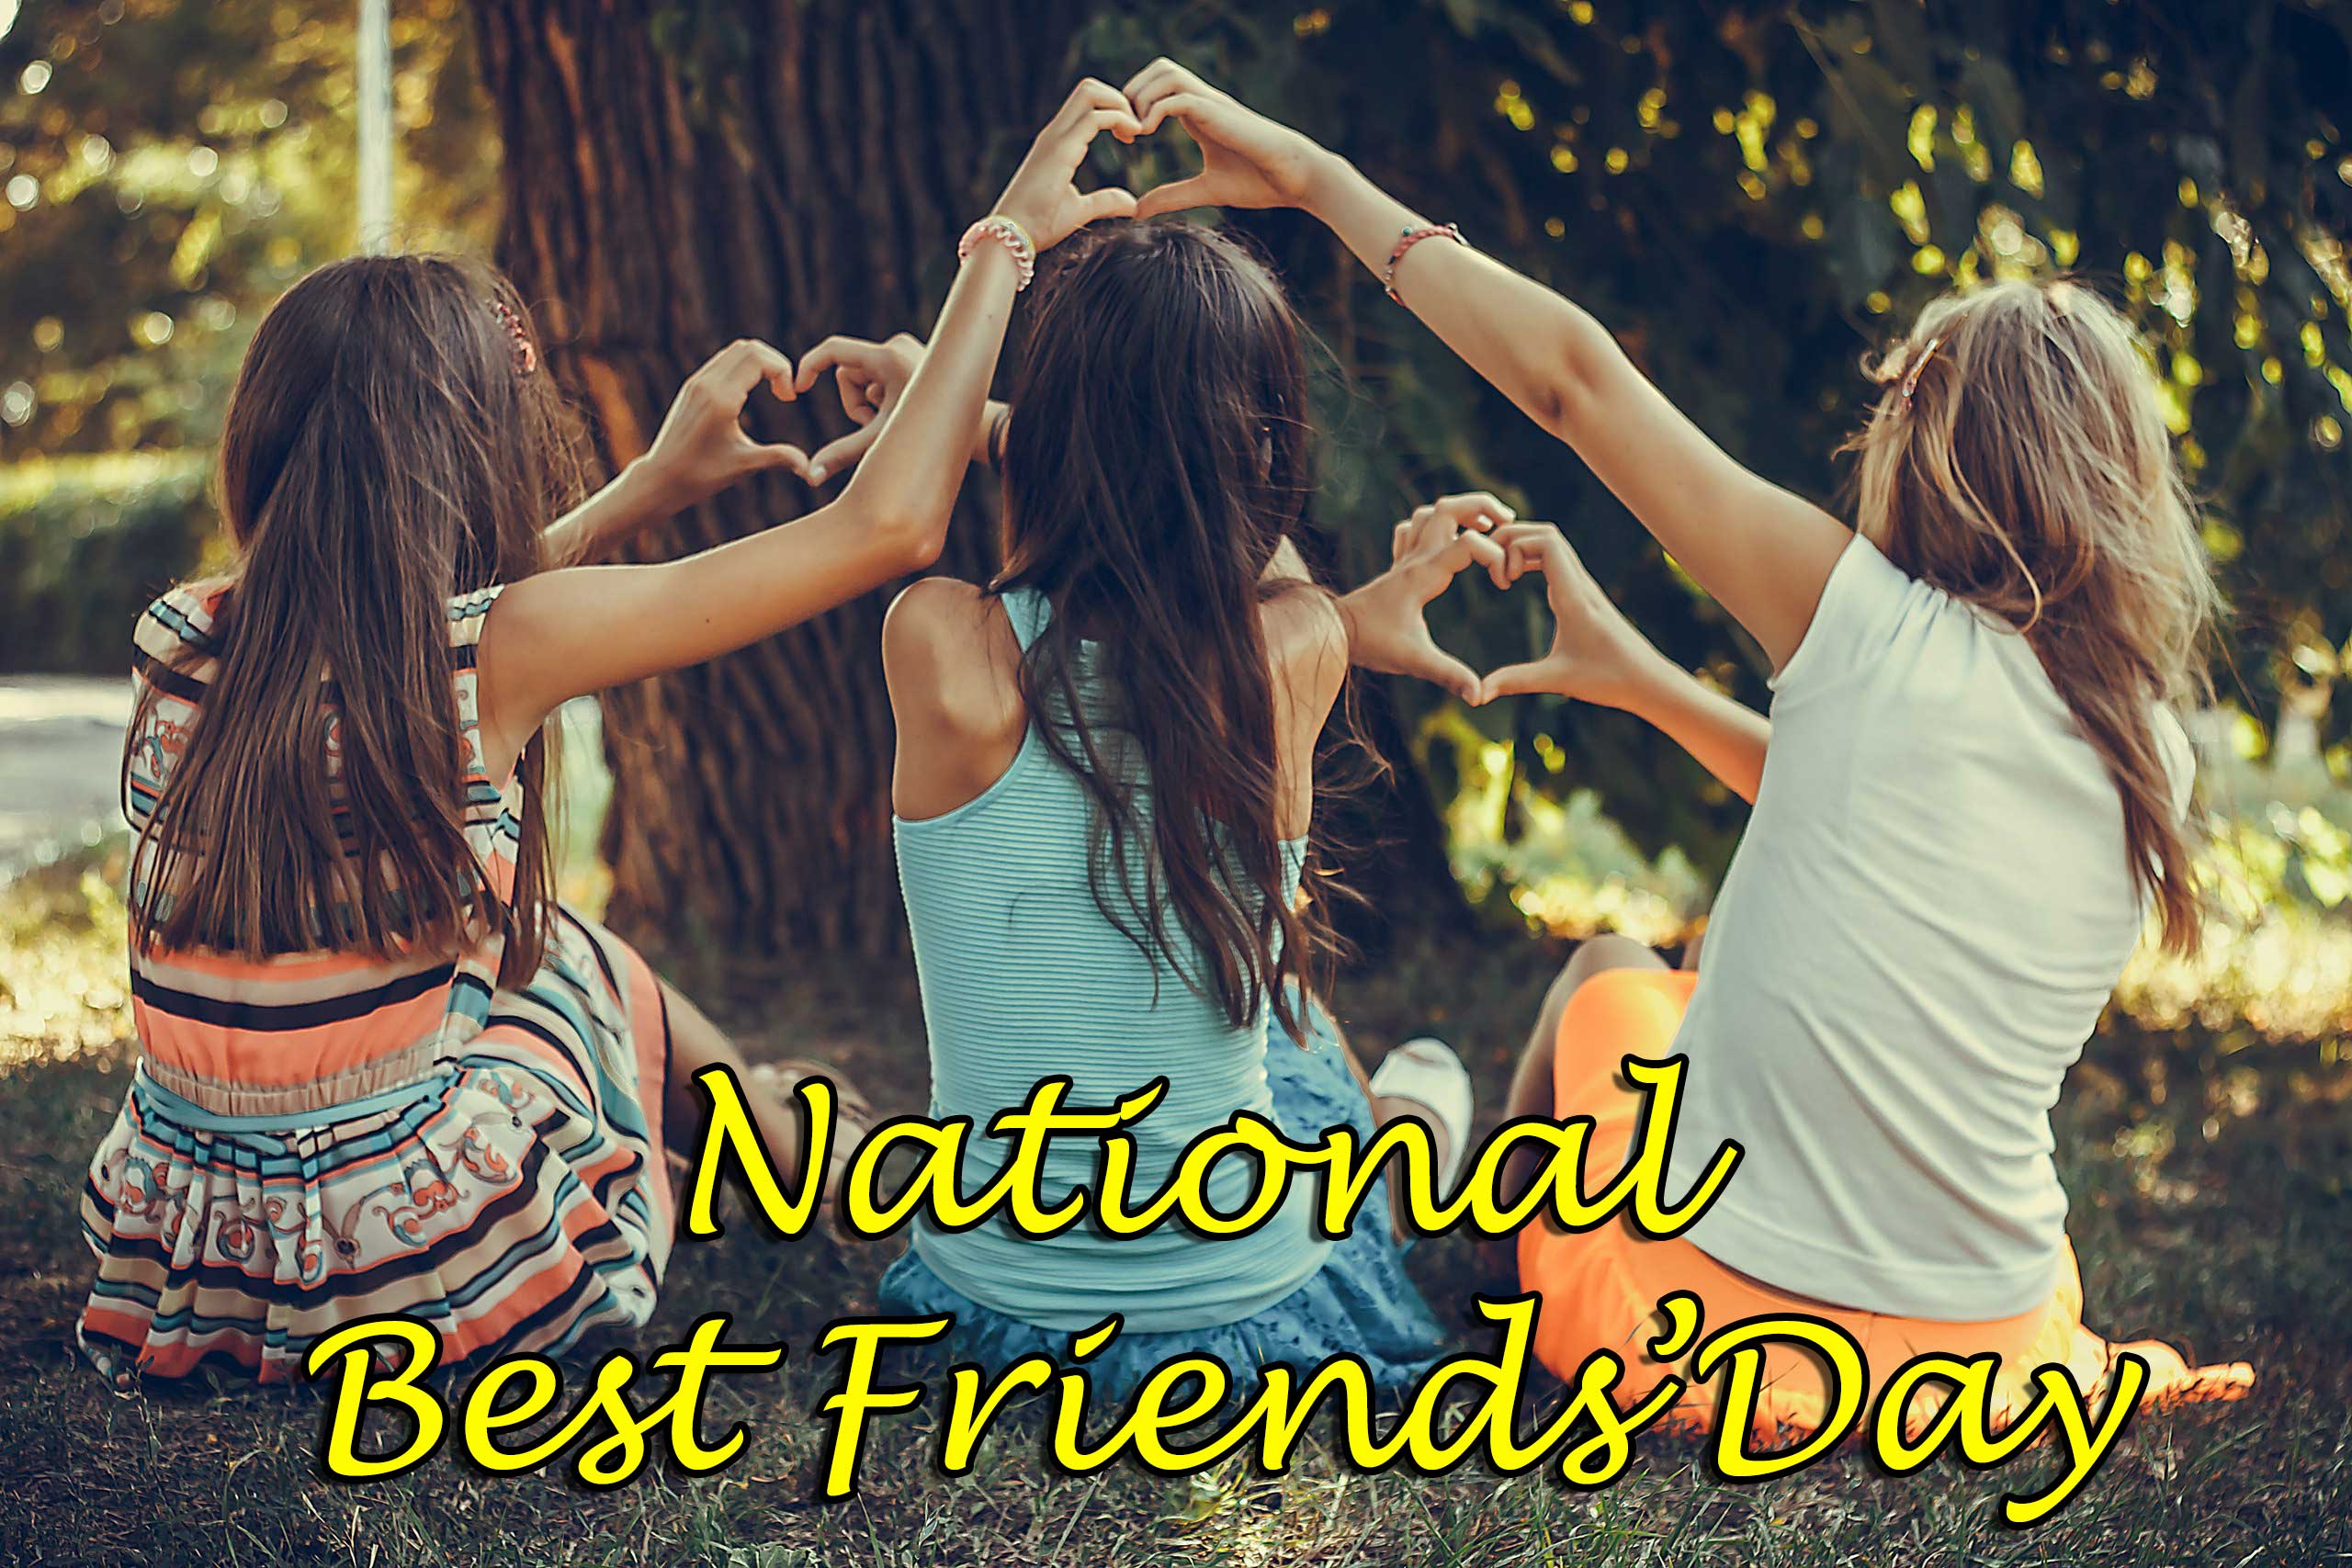 National Best friends’ Day Bliss Products & Services